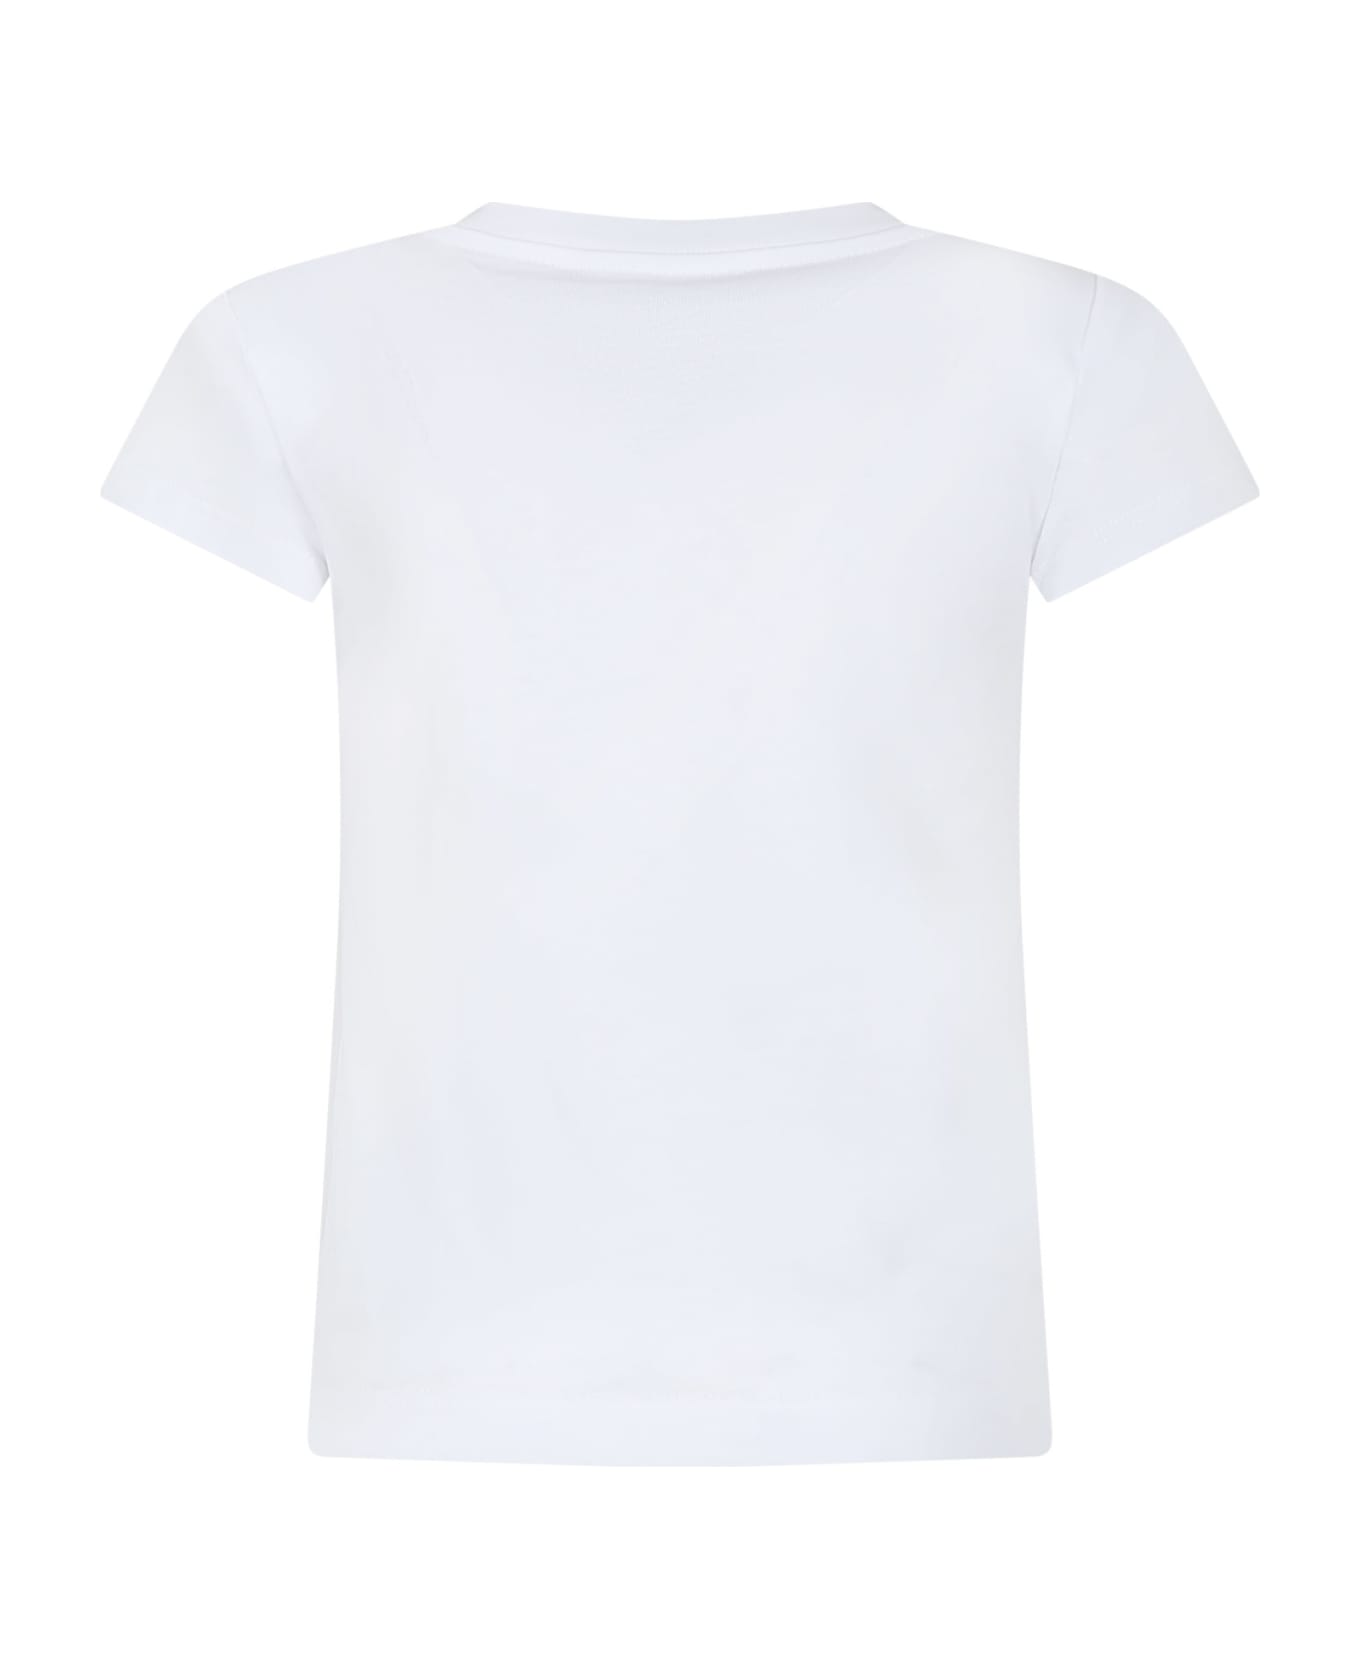 Balmain White T-shirt For Girl With Logo And Strass - White